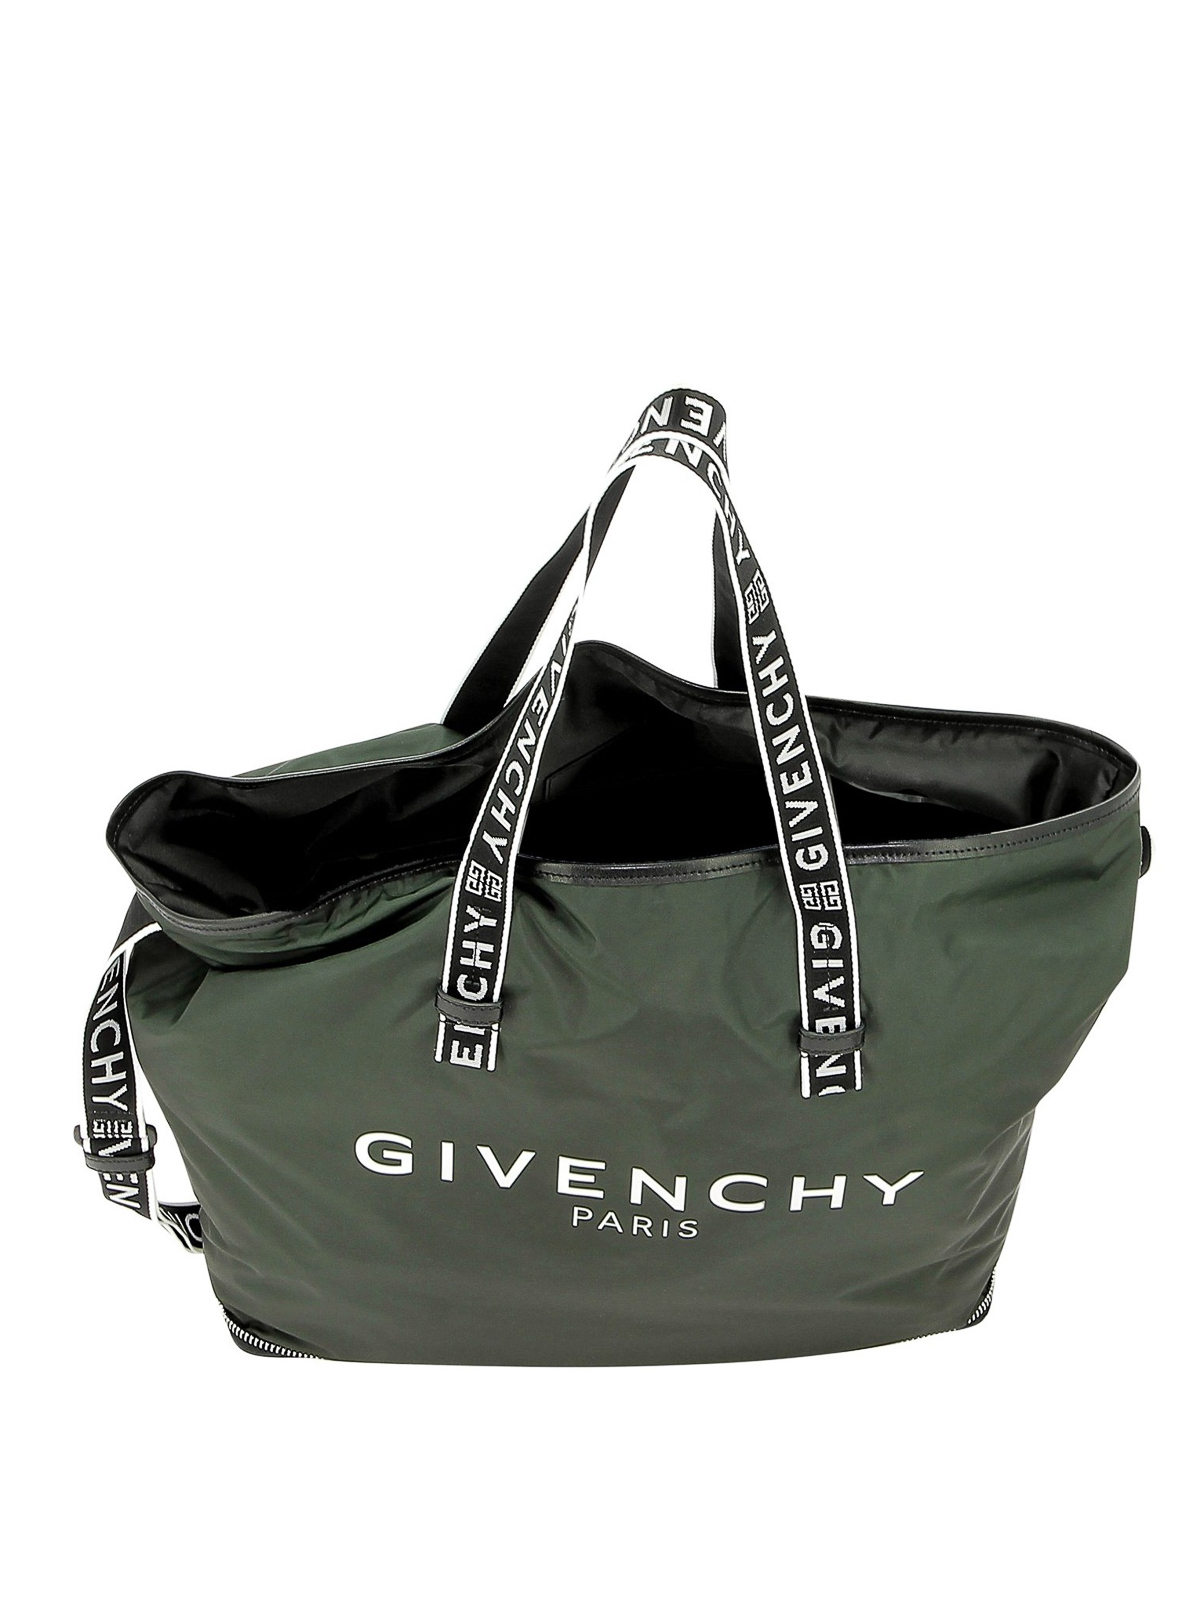 Share 85+ buy givenchy bag online - in.cdgdbentre